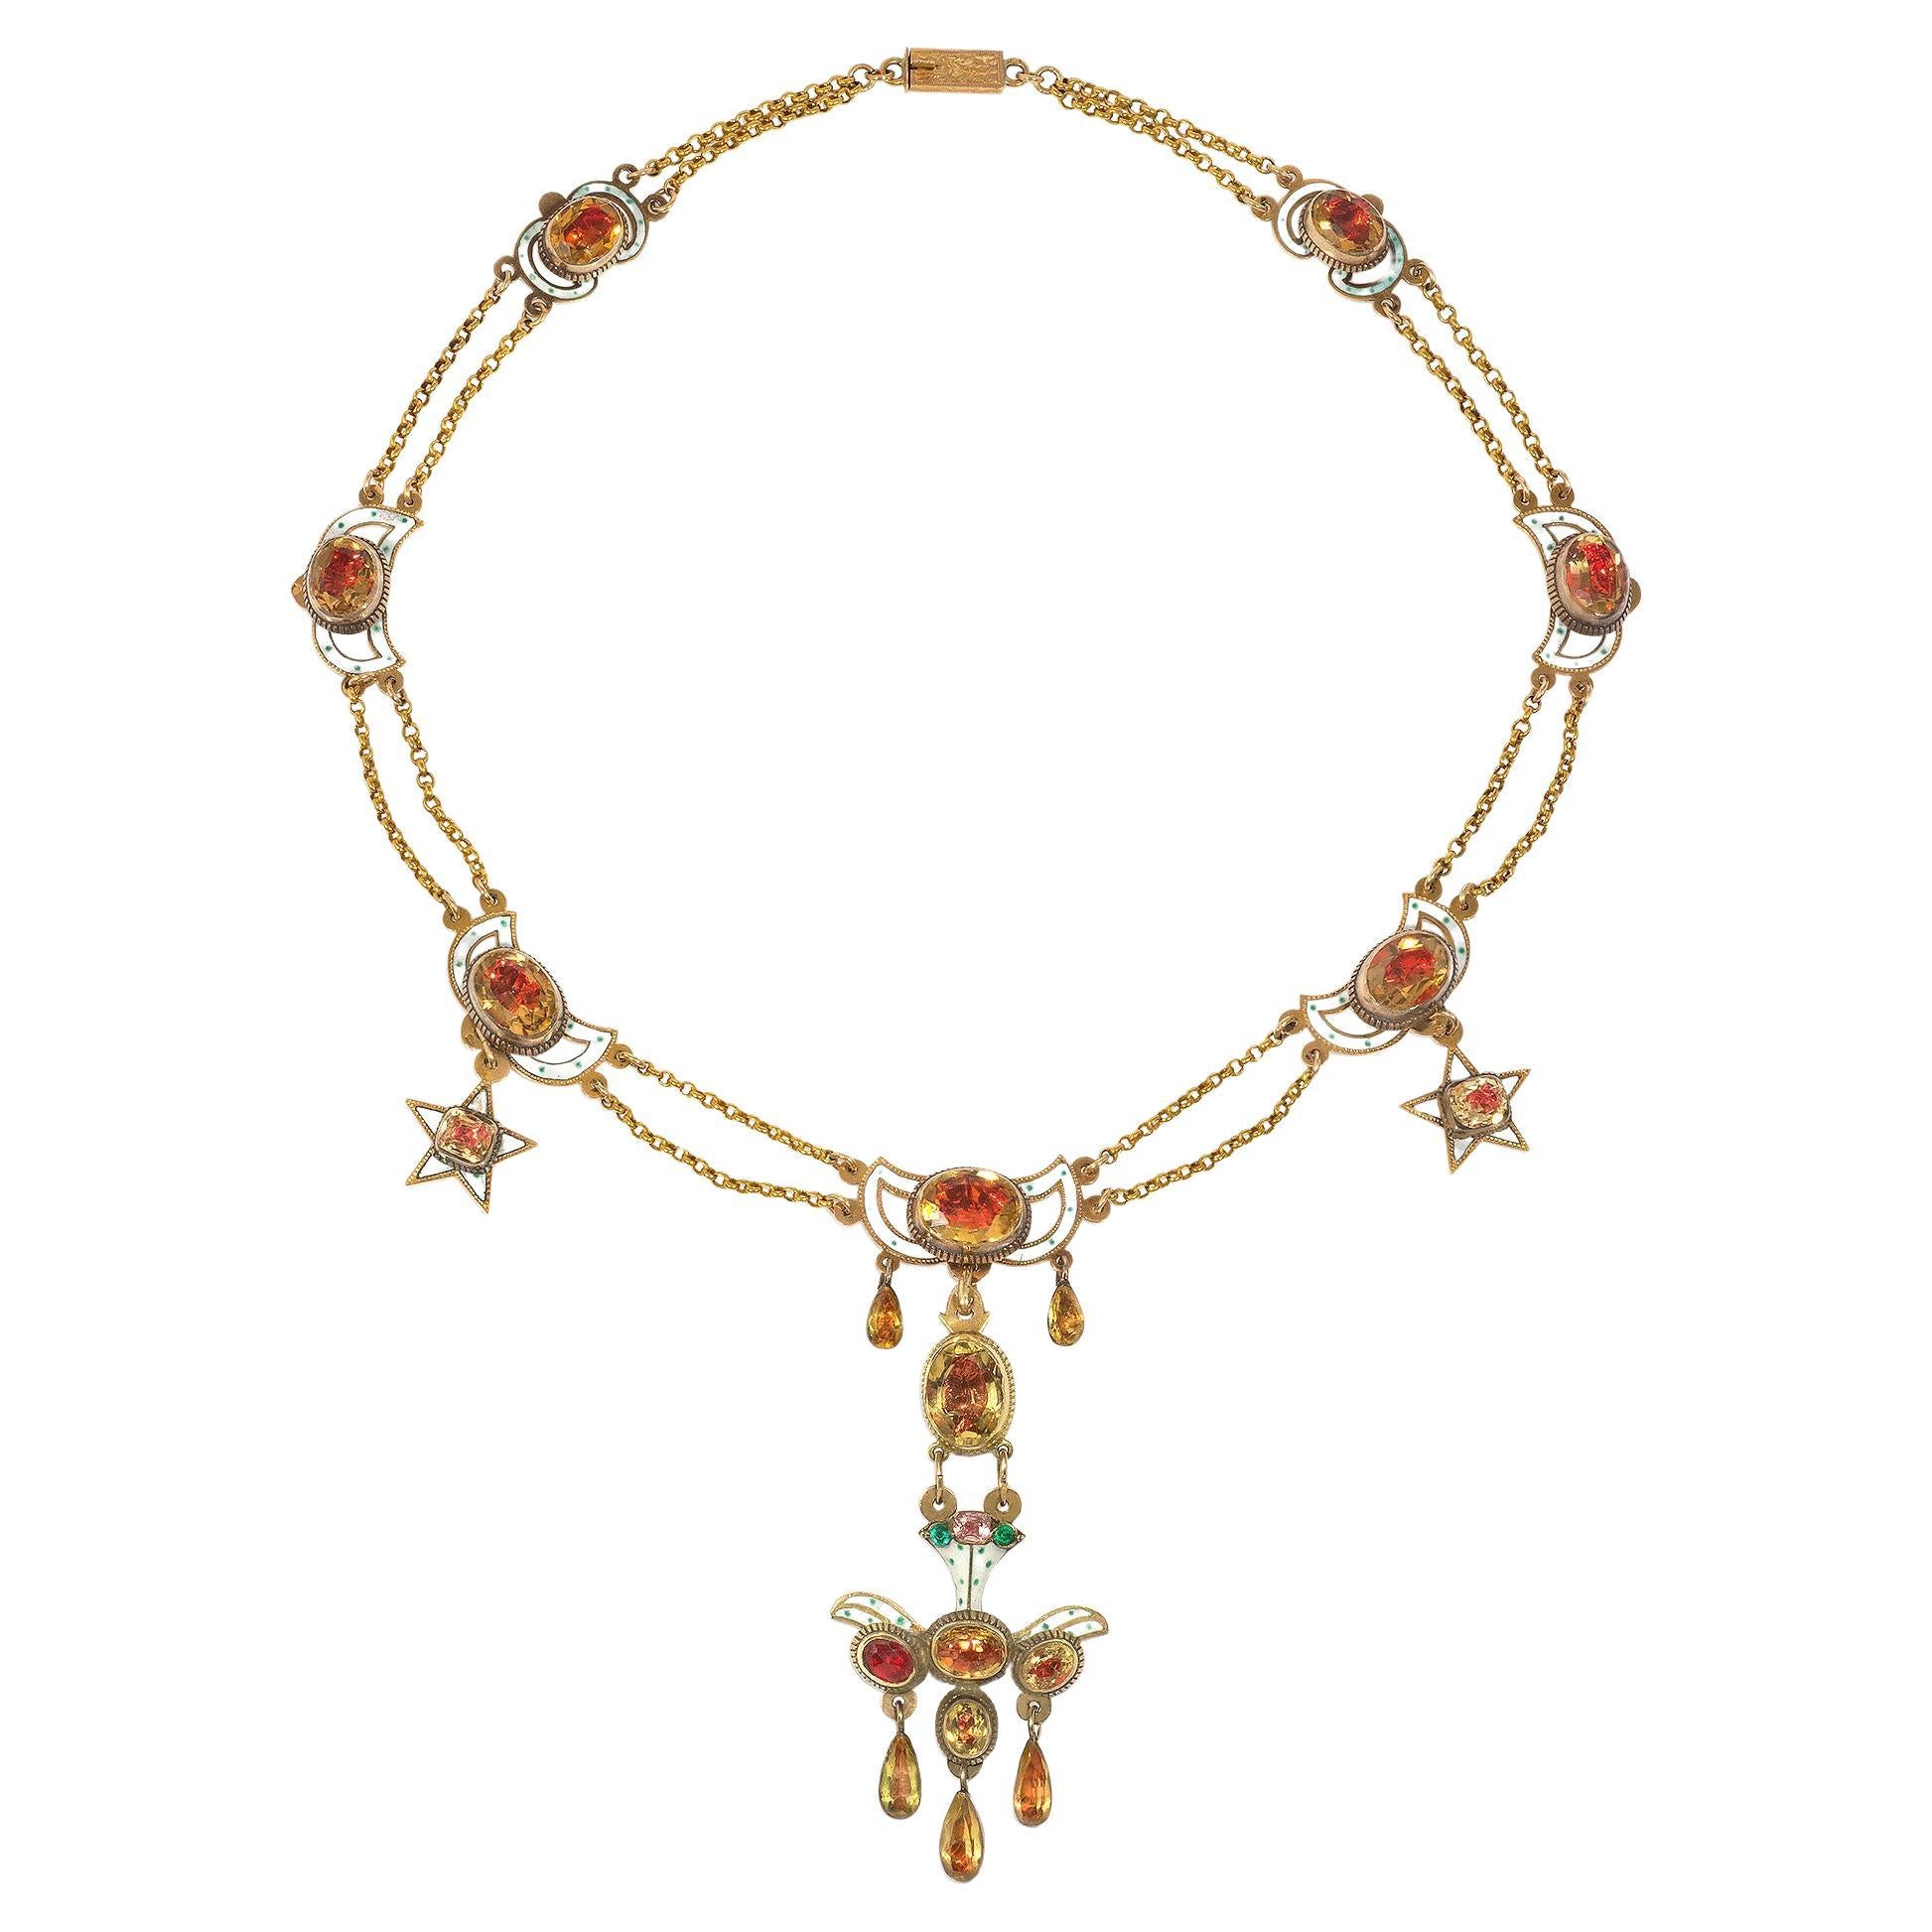 French Late 18th Century Gold, Foiled Citrine, and Enamel Festoon Necklace 